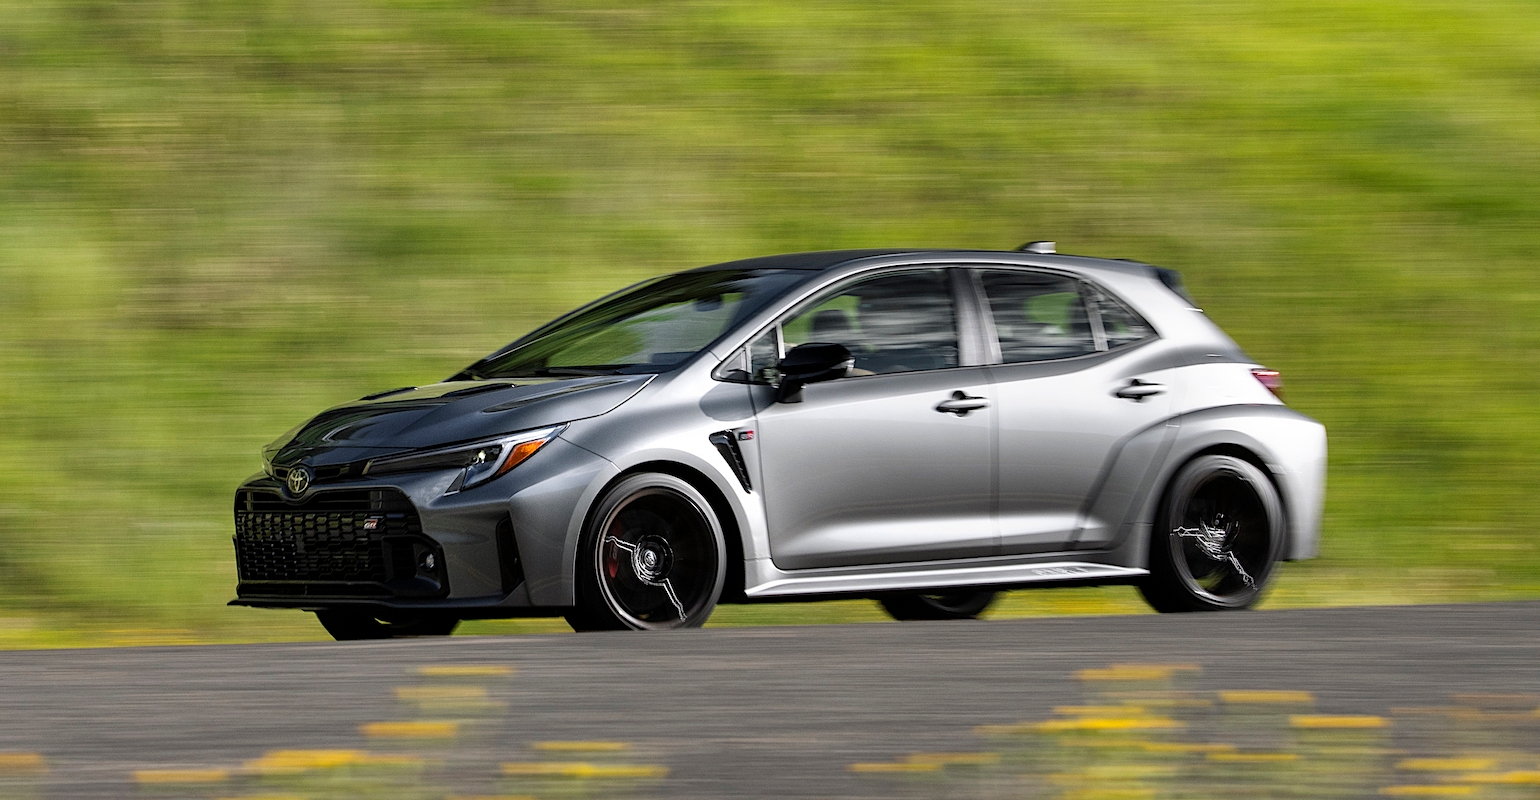 Here's What Makes the Toyota GR Corolla's Engine Unique